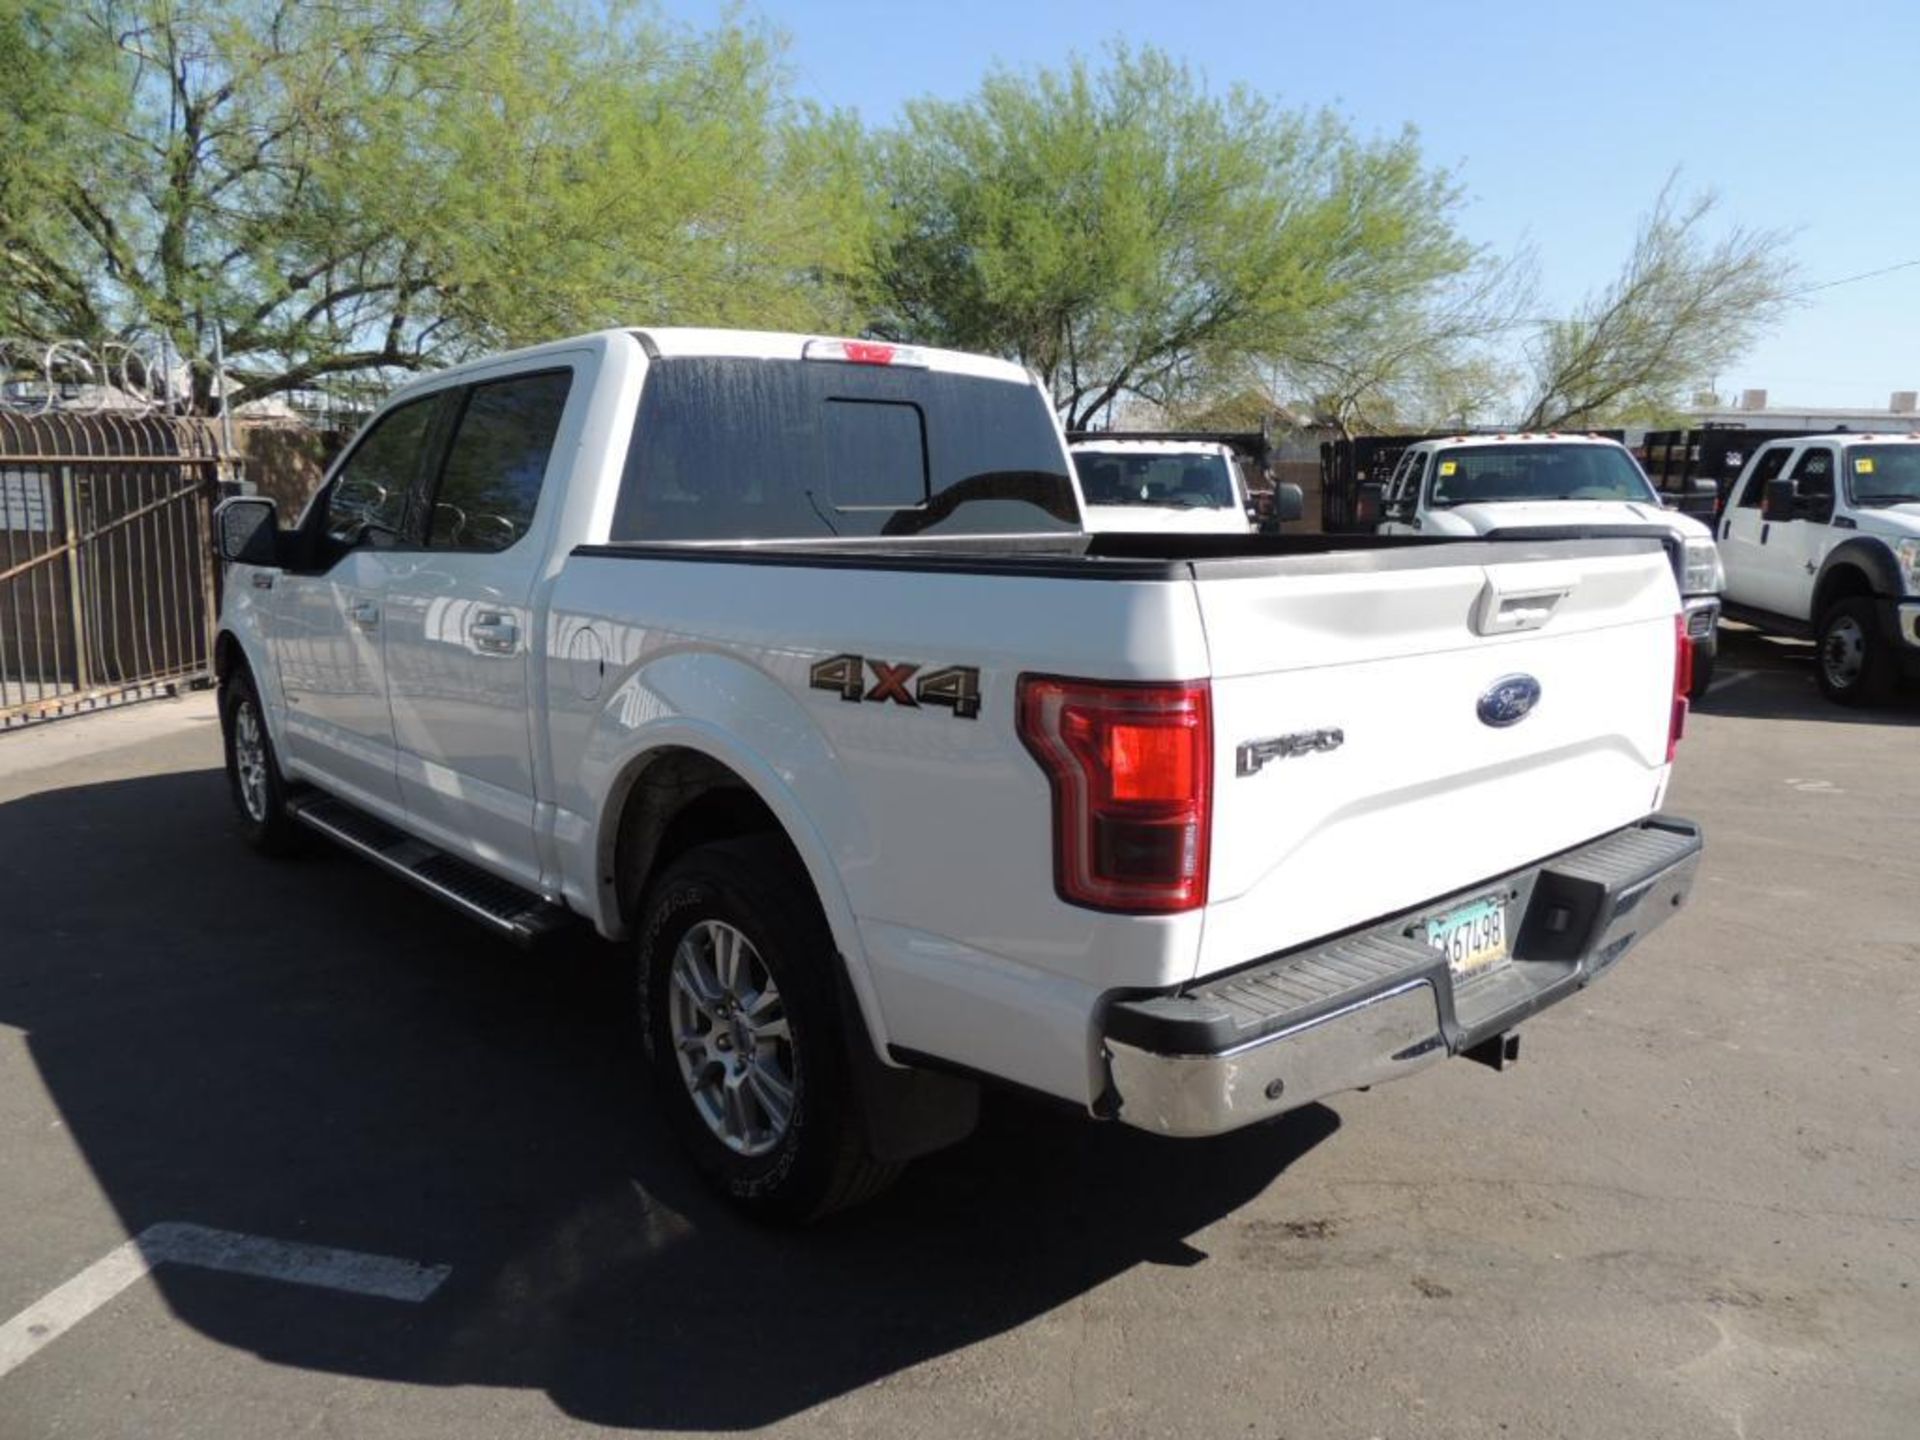 2017 Ford F150 Lariat Crew Cab Shortbed 4x4, VIN # 1FTEW1EG6HKC64162, 3.5 Ecoboost, Auto Trans, 116 - Image 4 of 4